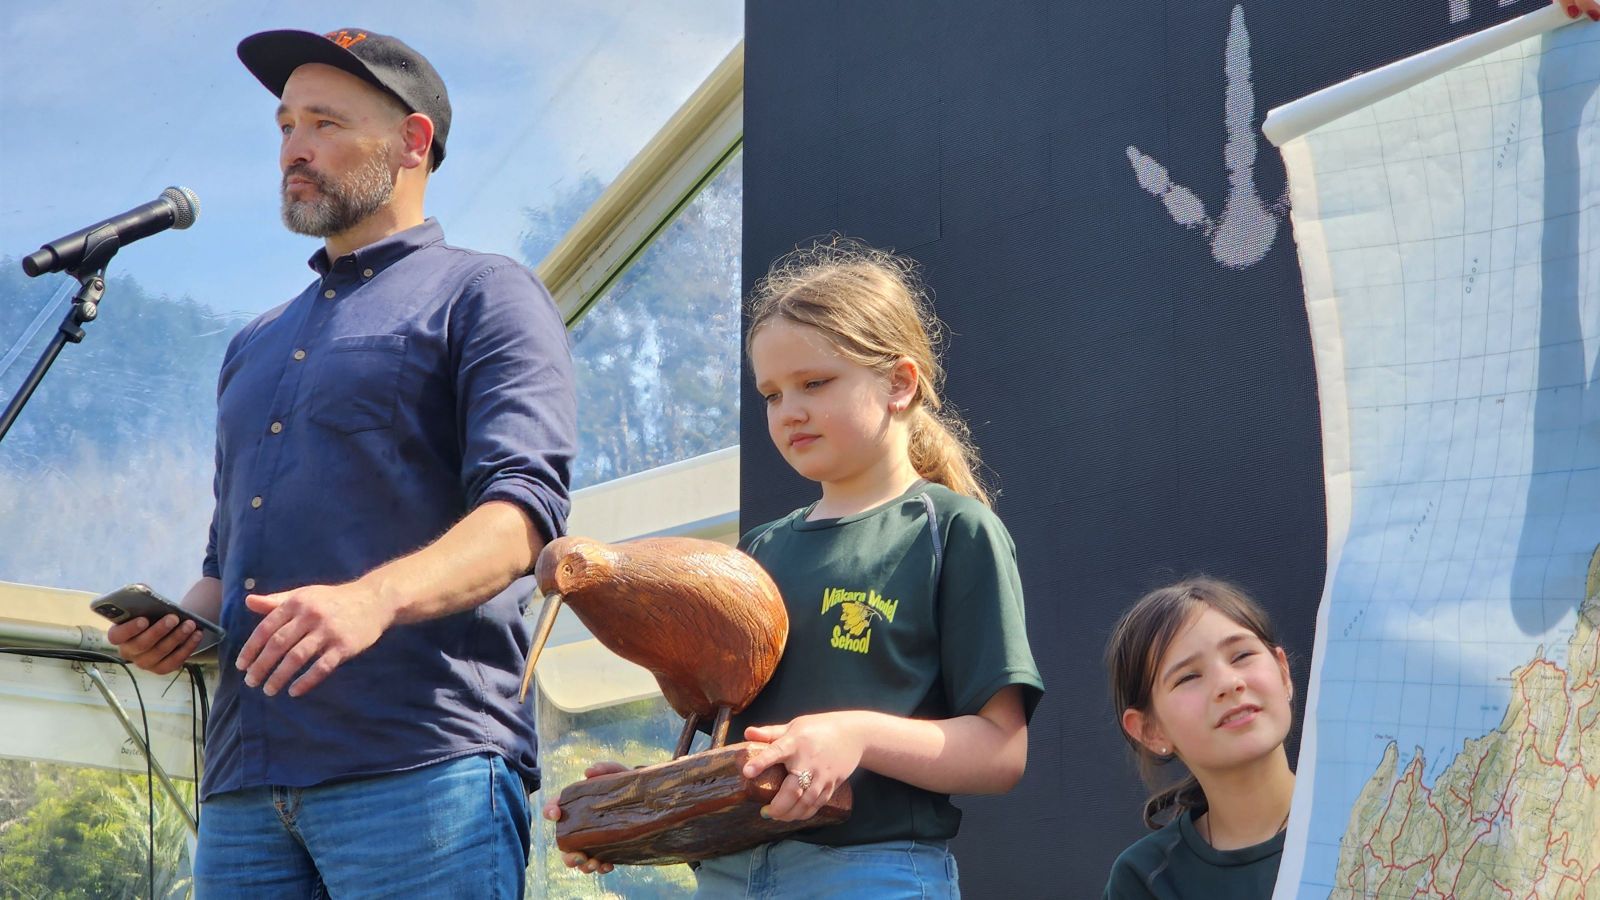 man at microphone with girl beside him holding a wooden kiwi